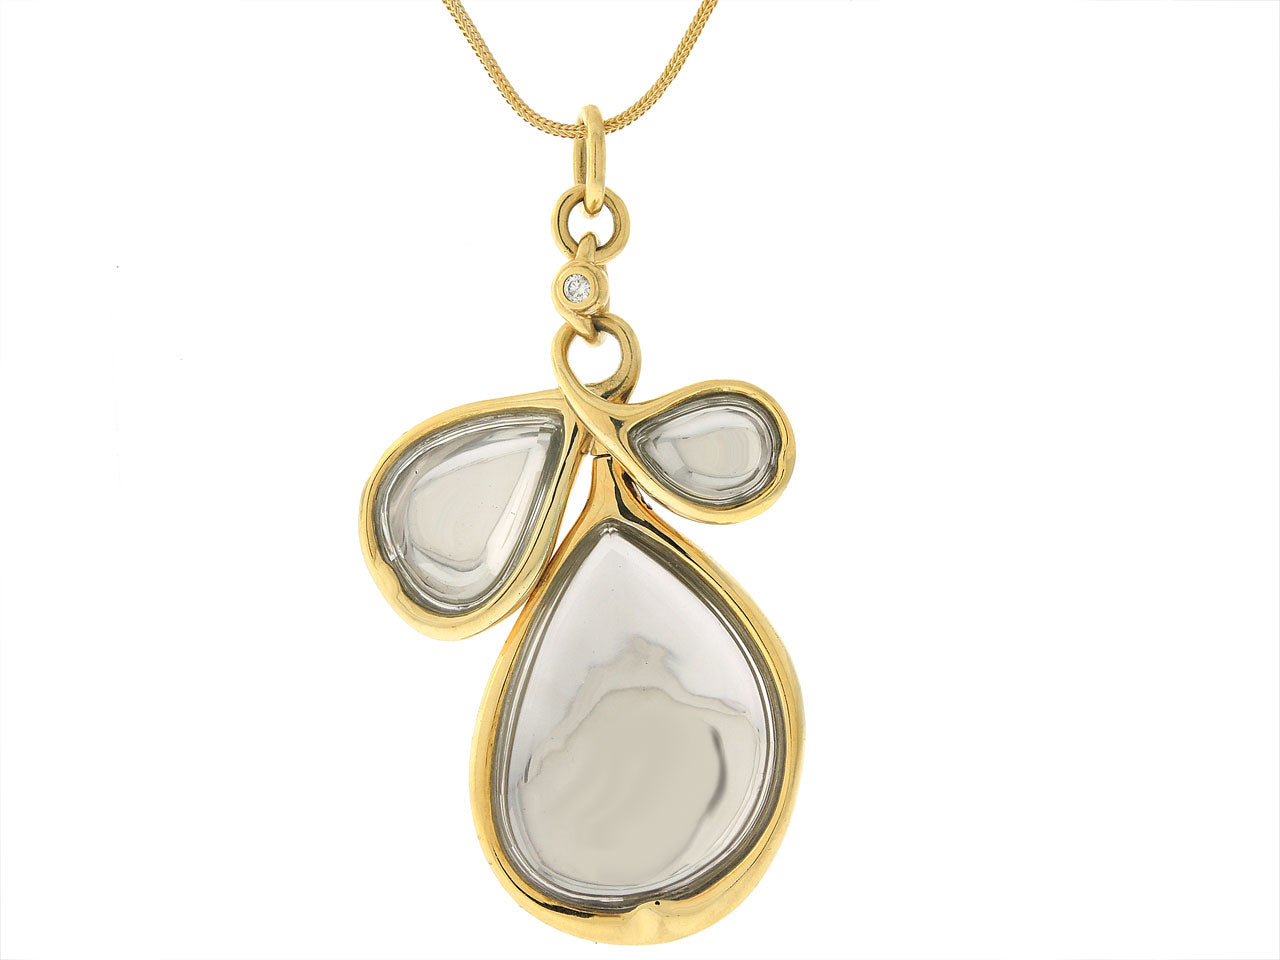 H.Stern 'Sutras' Pendant Rock Crystal Necklace in 18K